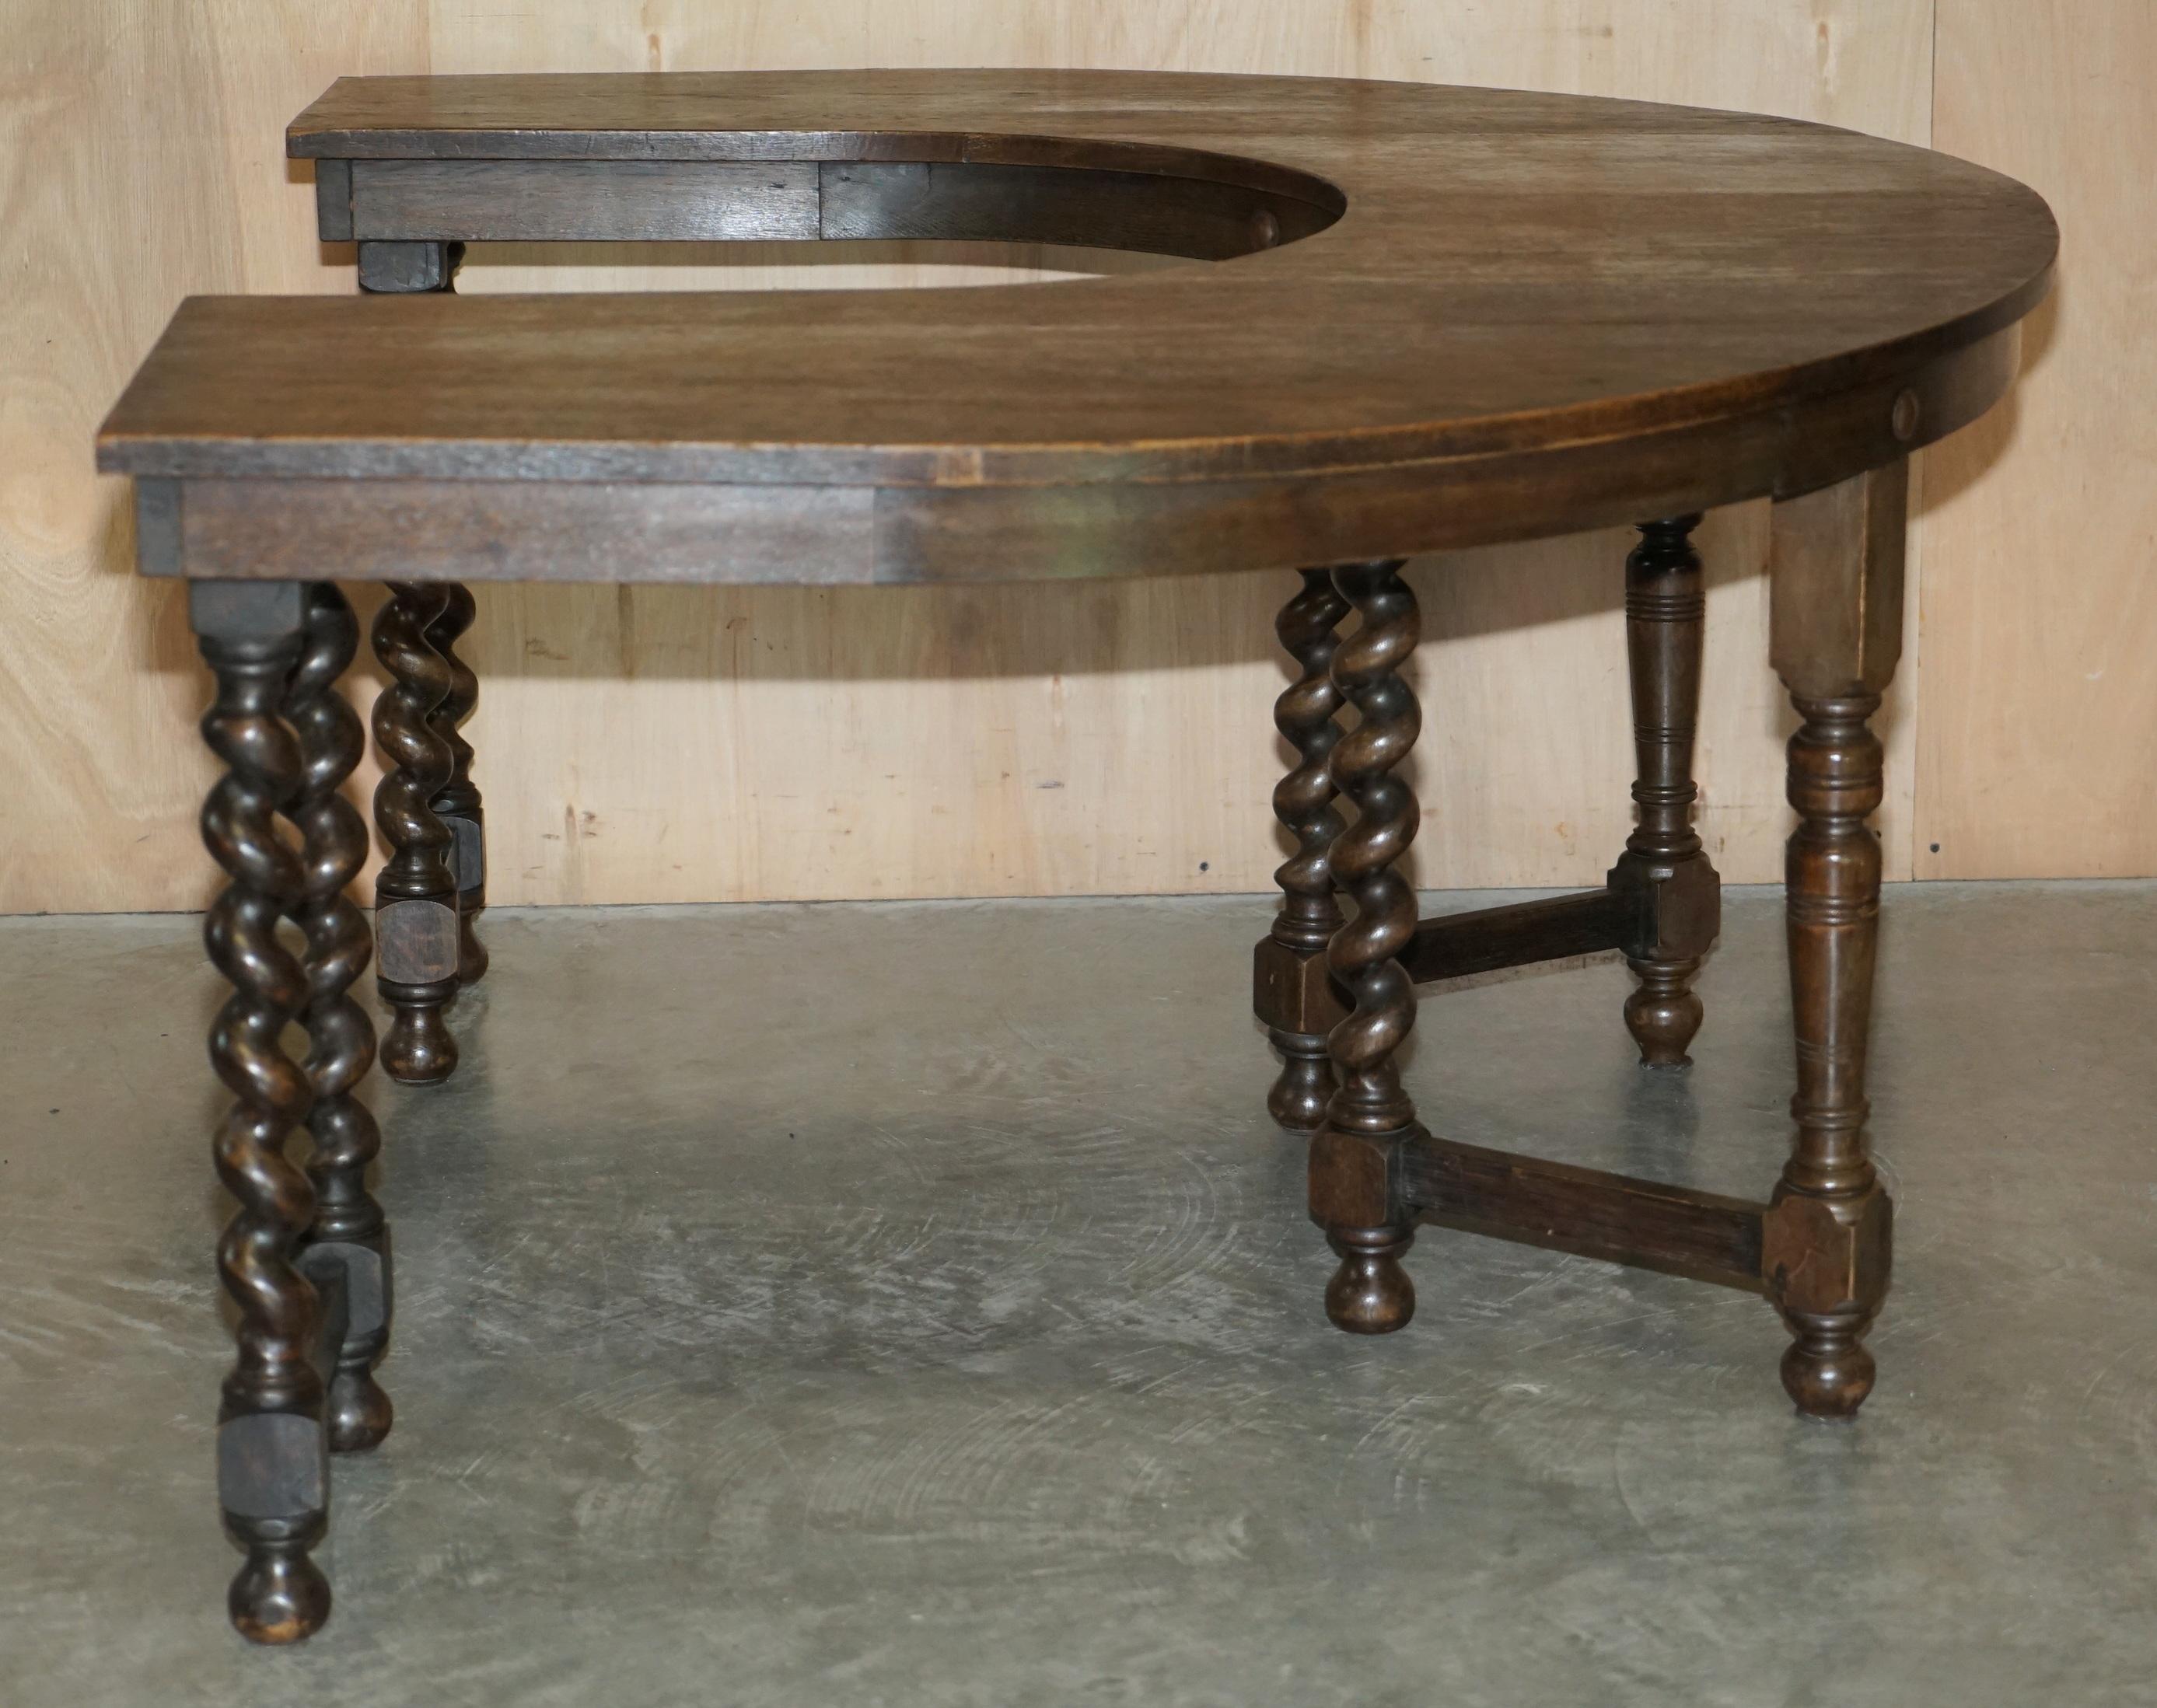 RARE & COLLECTABLE ANTIQUE JACOBEAN REVIVAL BARLEY TWiST LEG ENGLISH HUNT TABLE For Sale 5